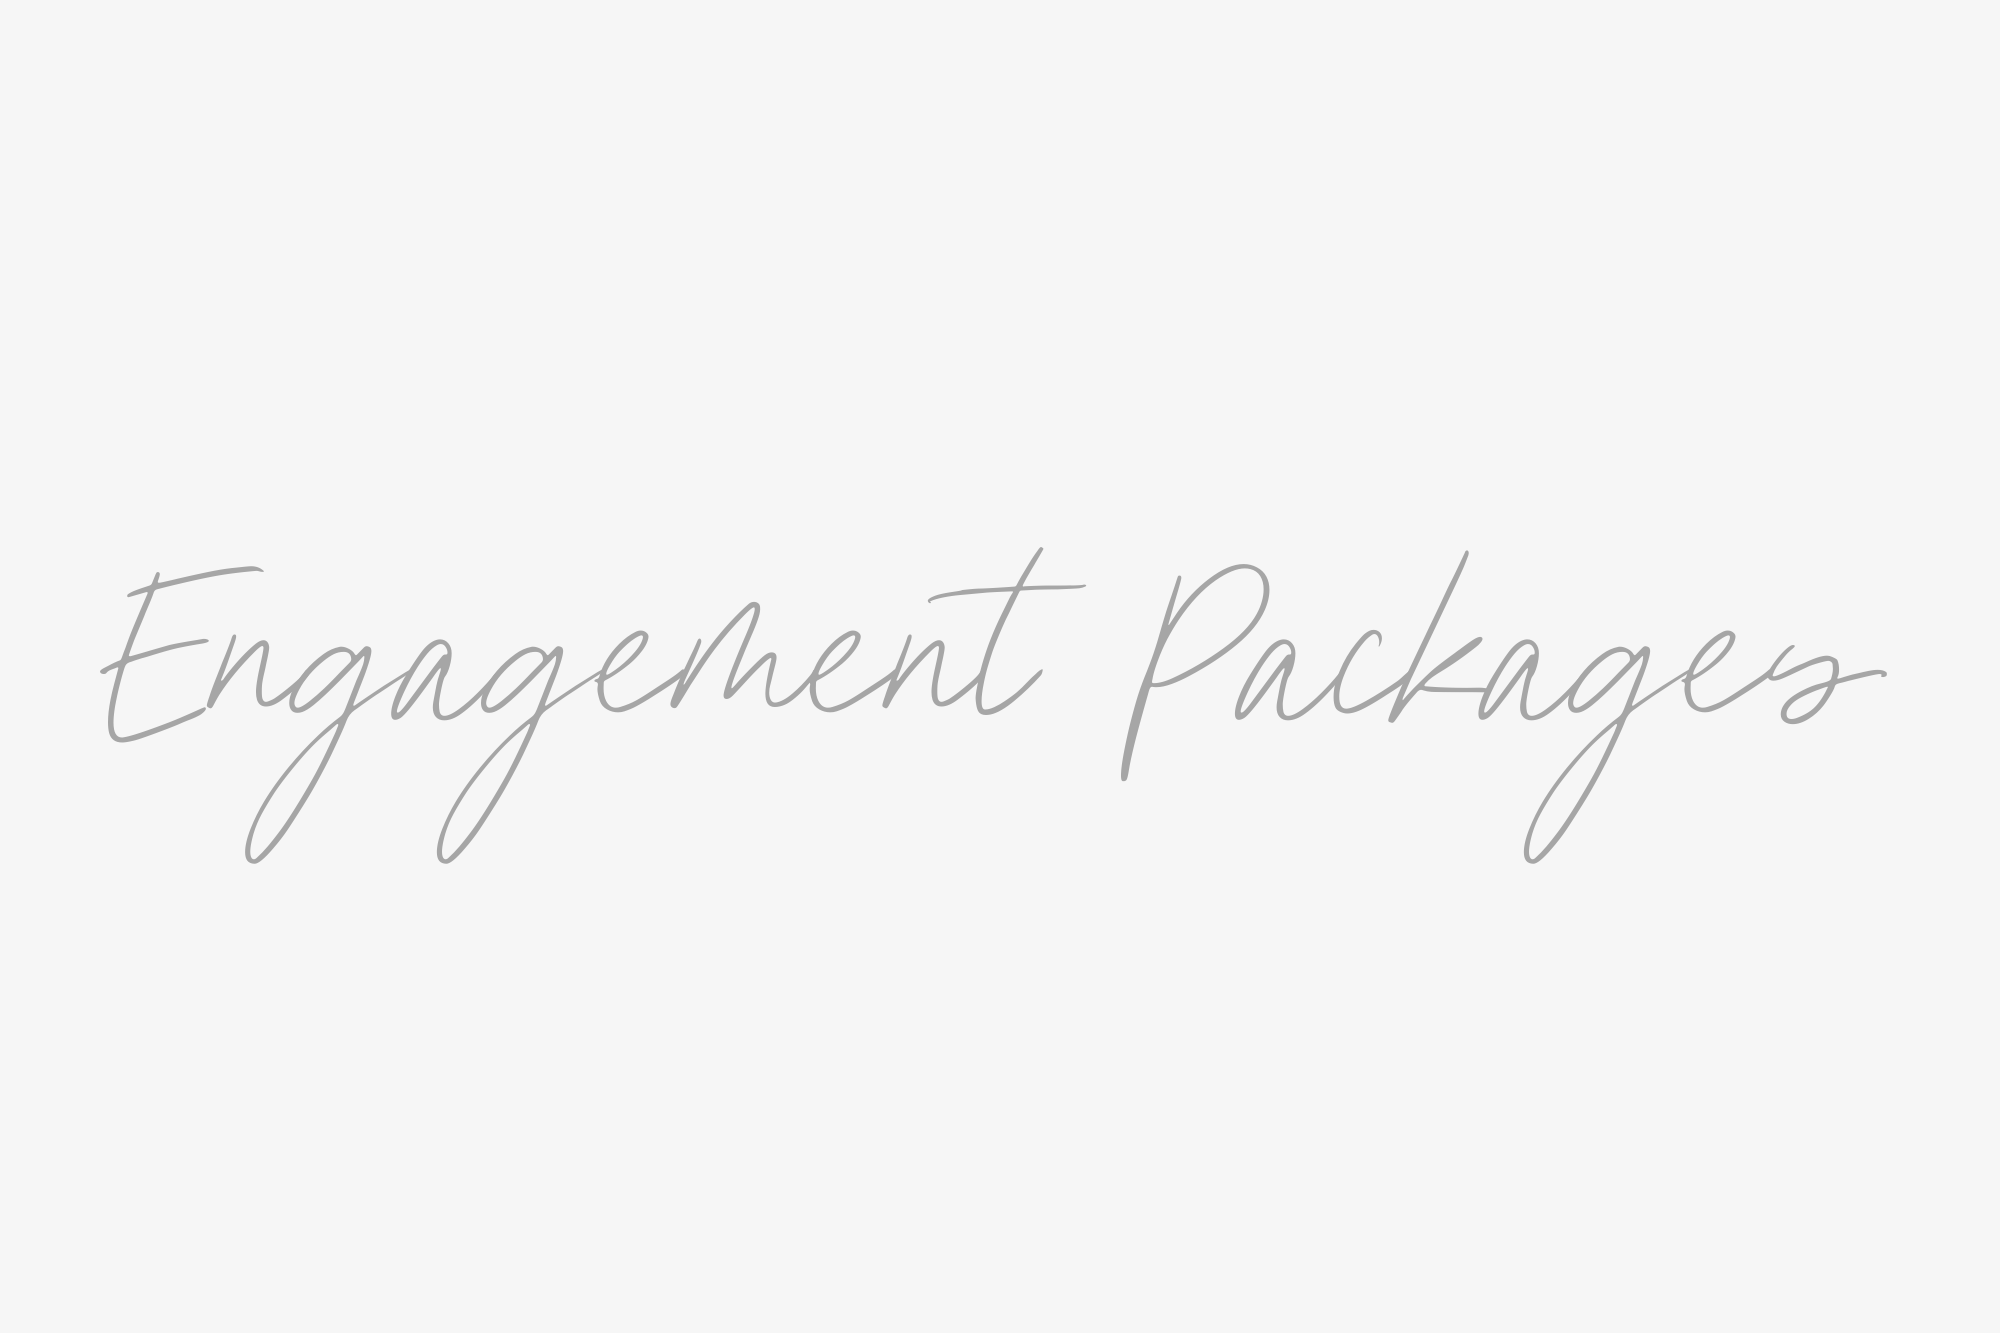 Engagement Packages.png